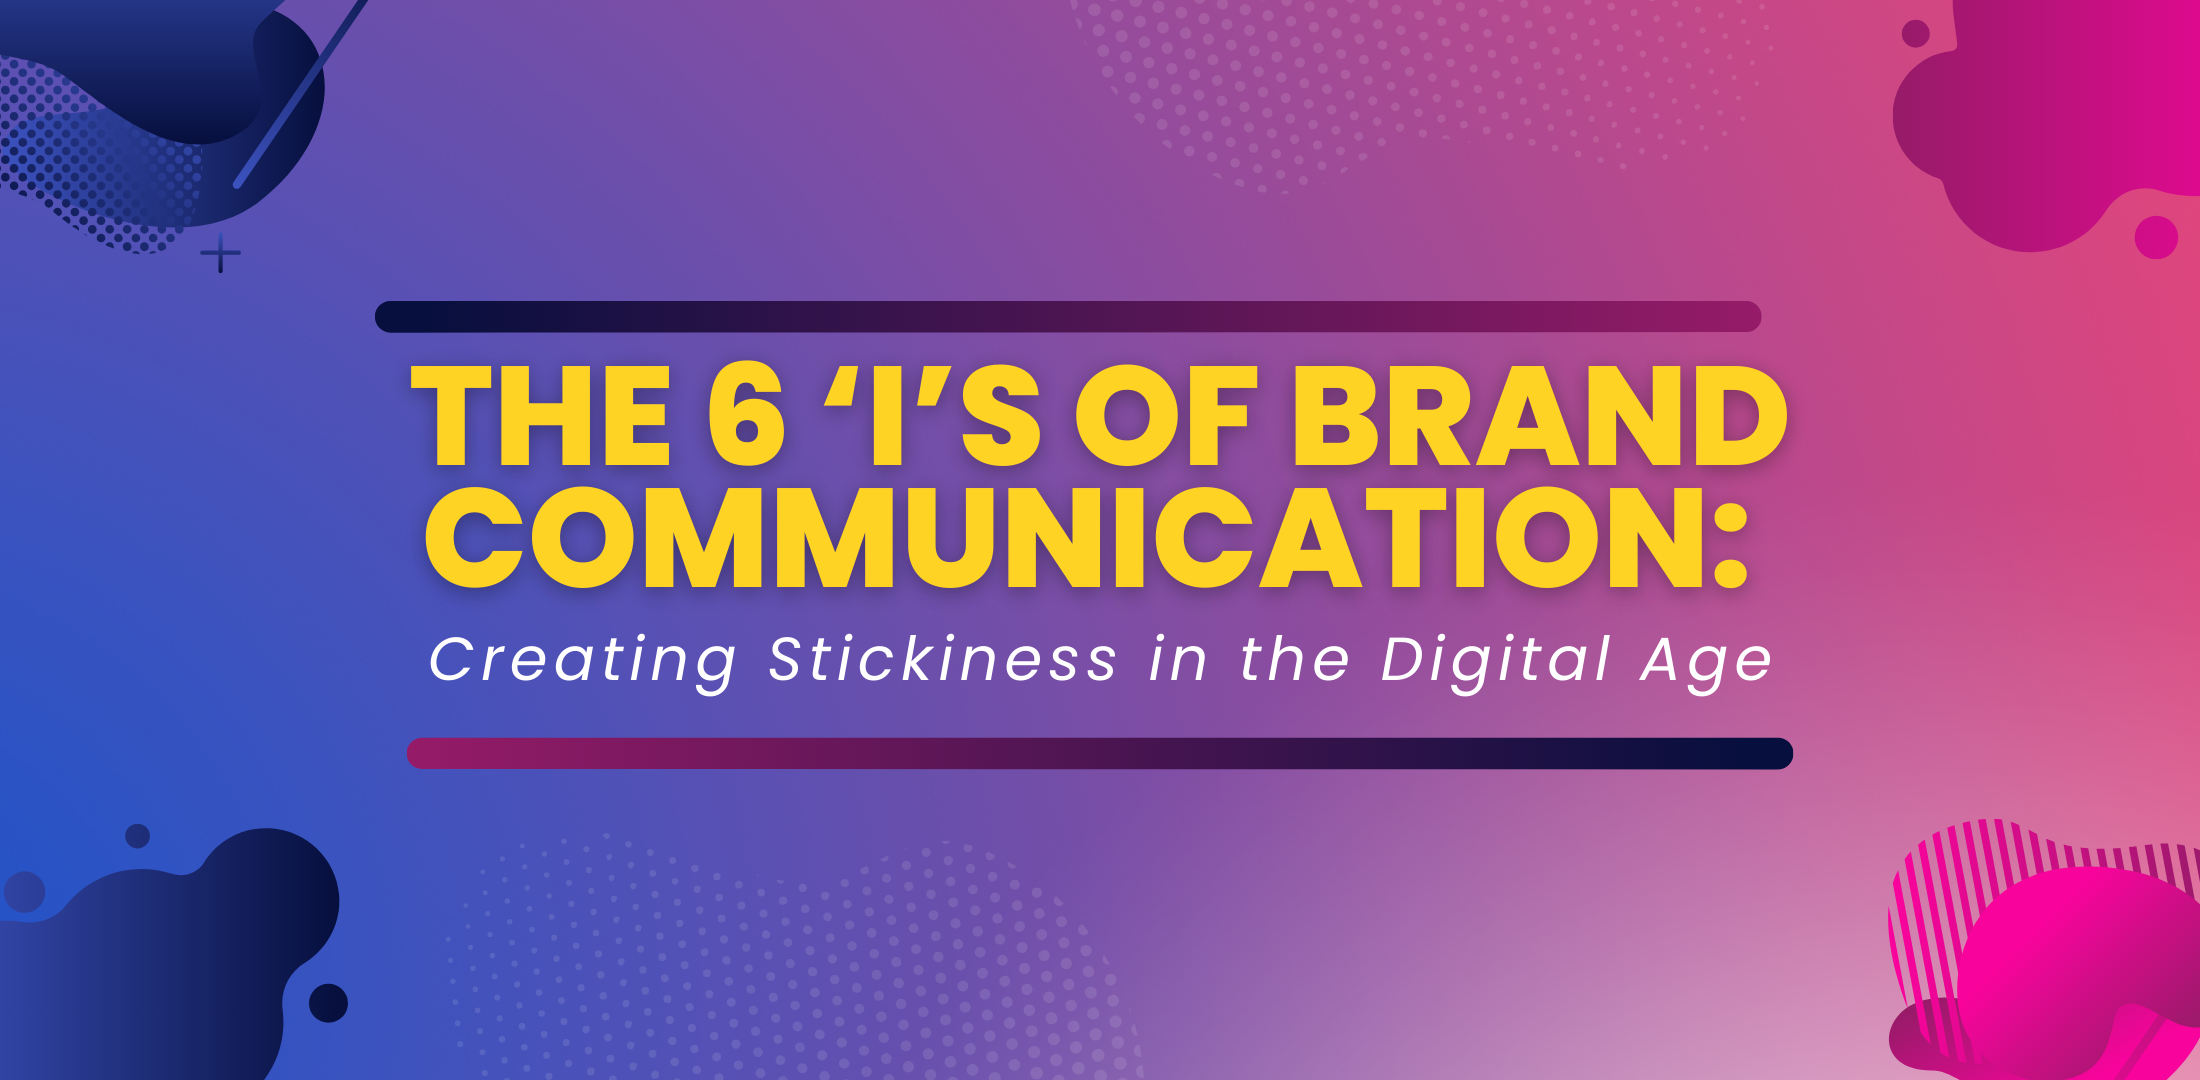 The 6 ‘I’s of Brand Communication: Creating Stickiness in the Digital Age